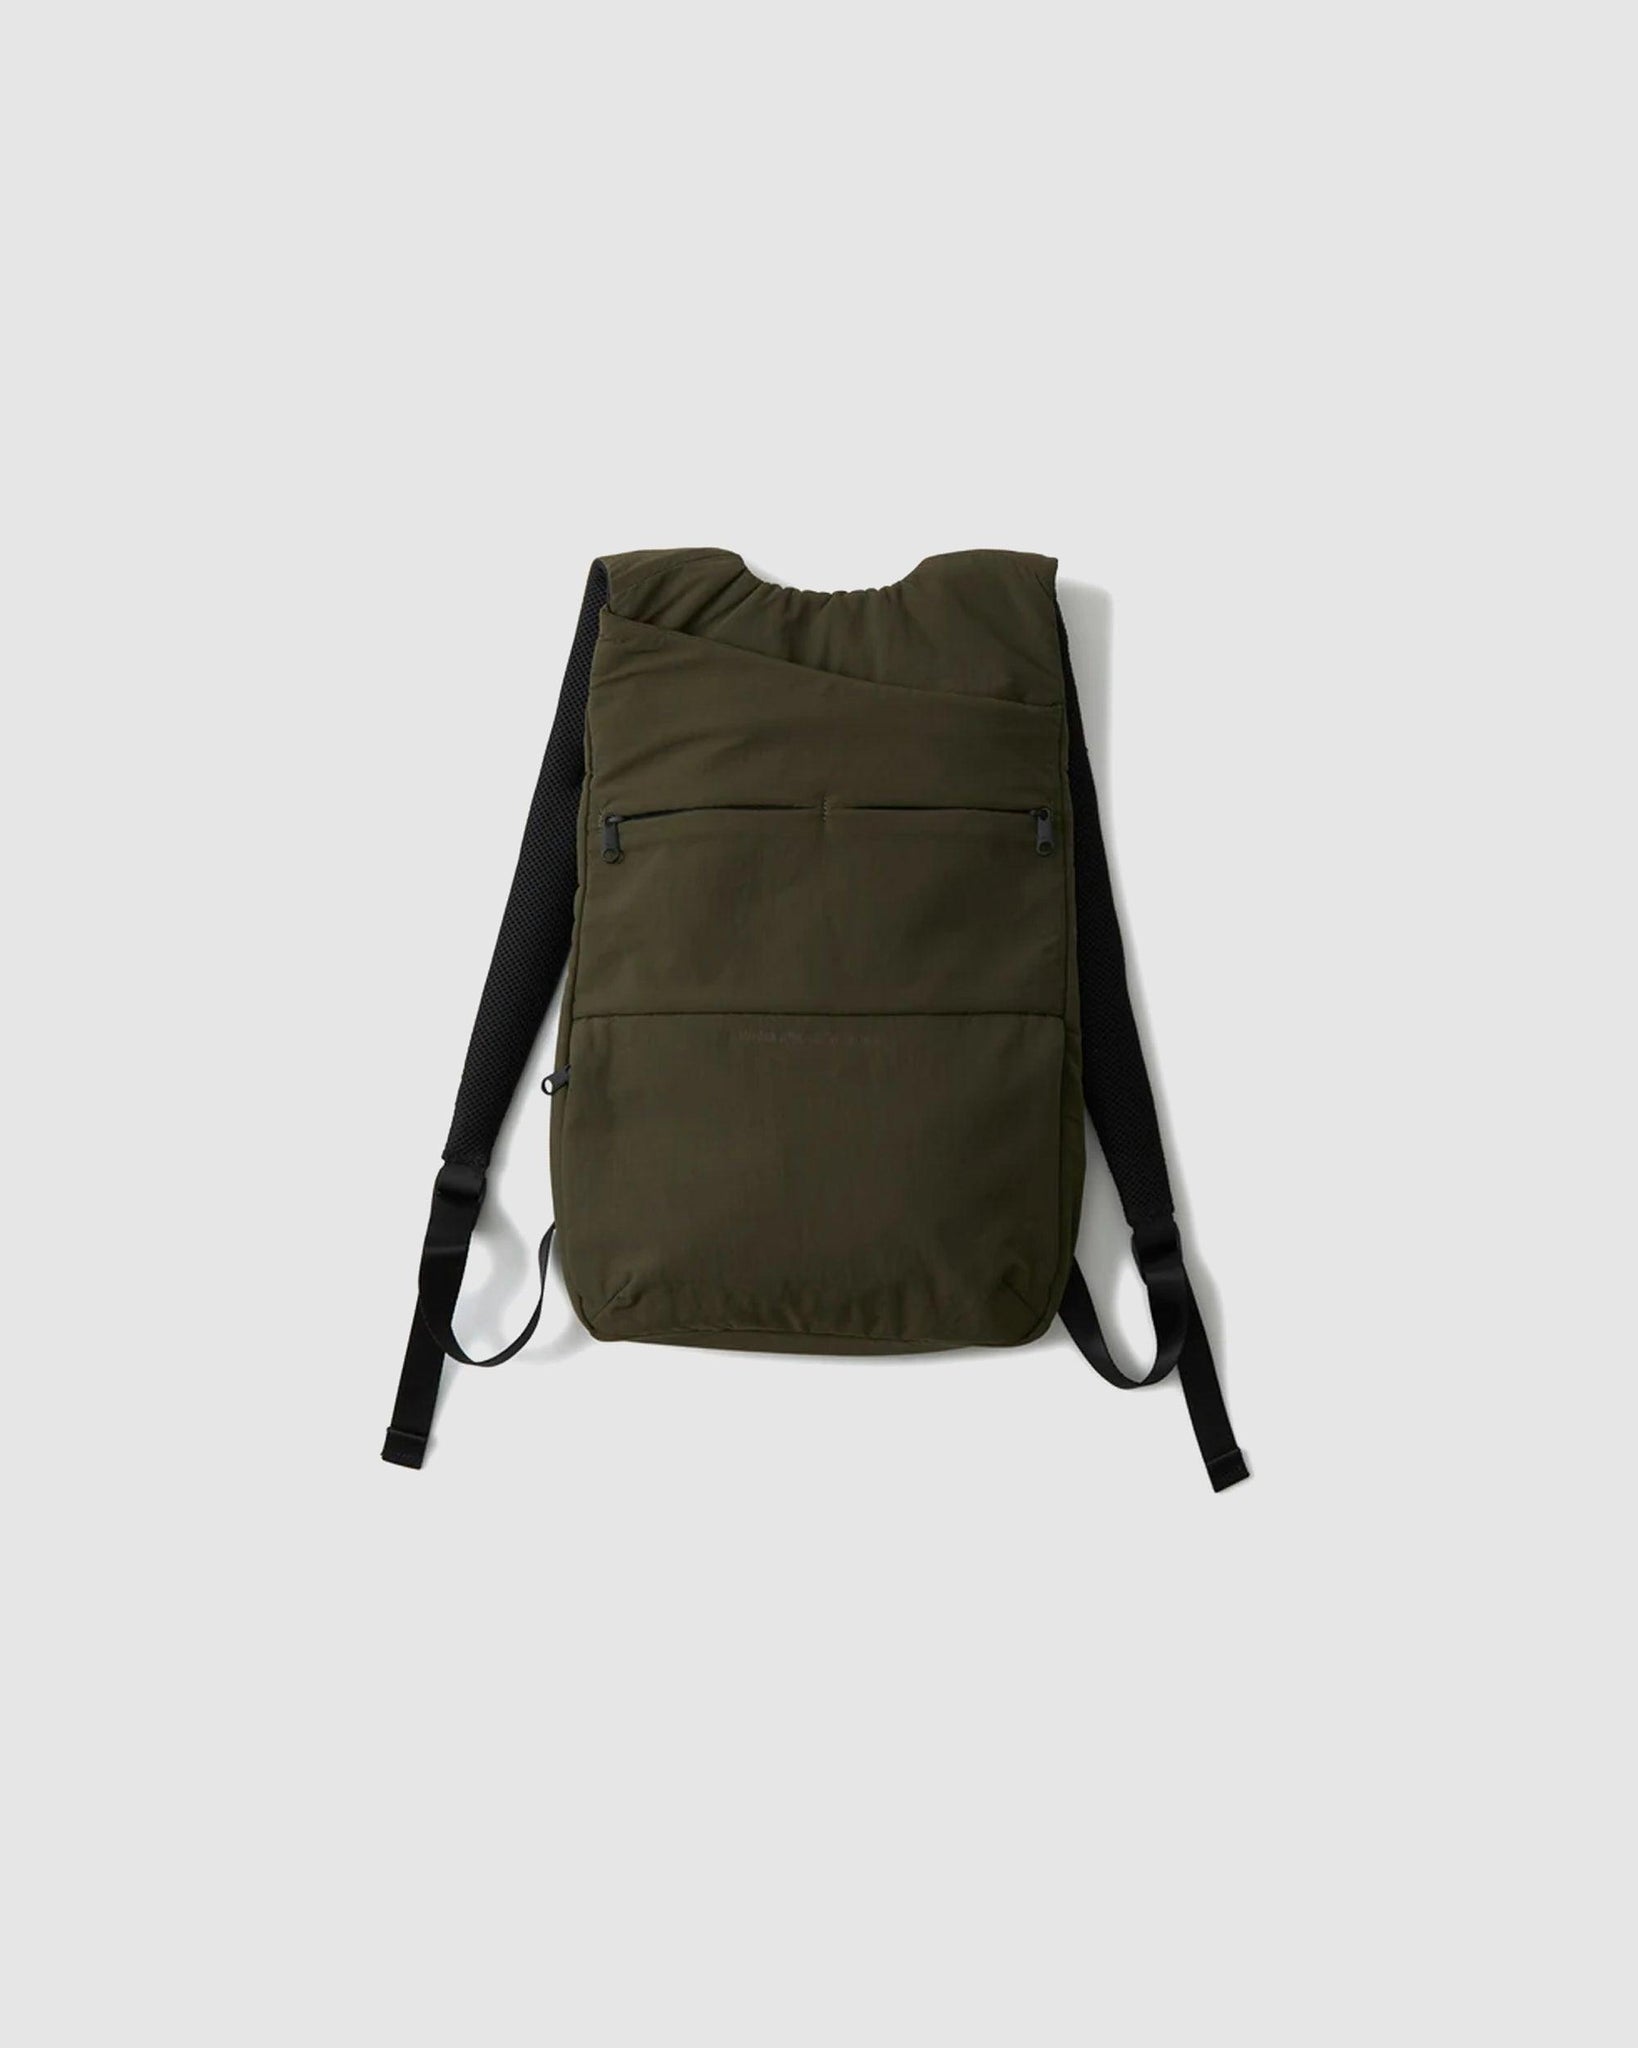 Tussah Day Pack Khaki - {{ collection.title }} - Chinatown Country Club 